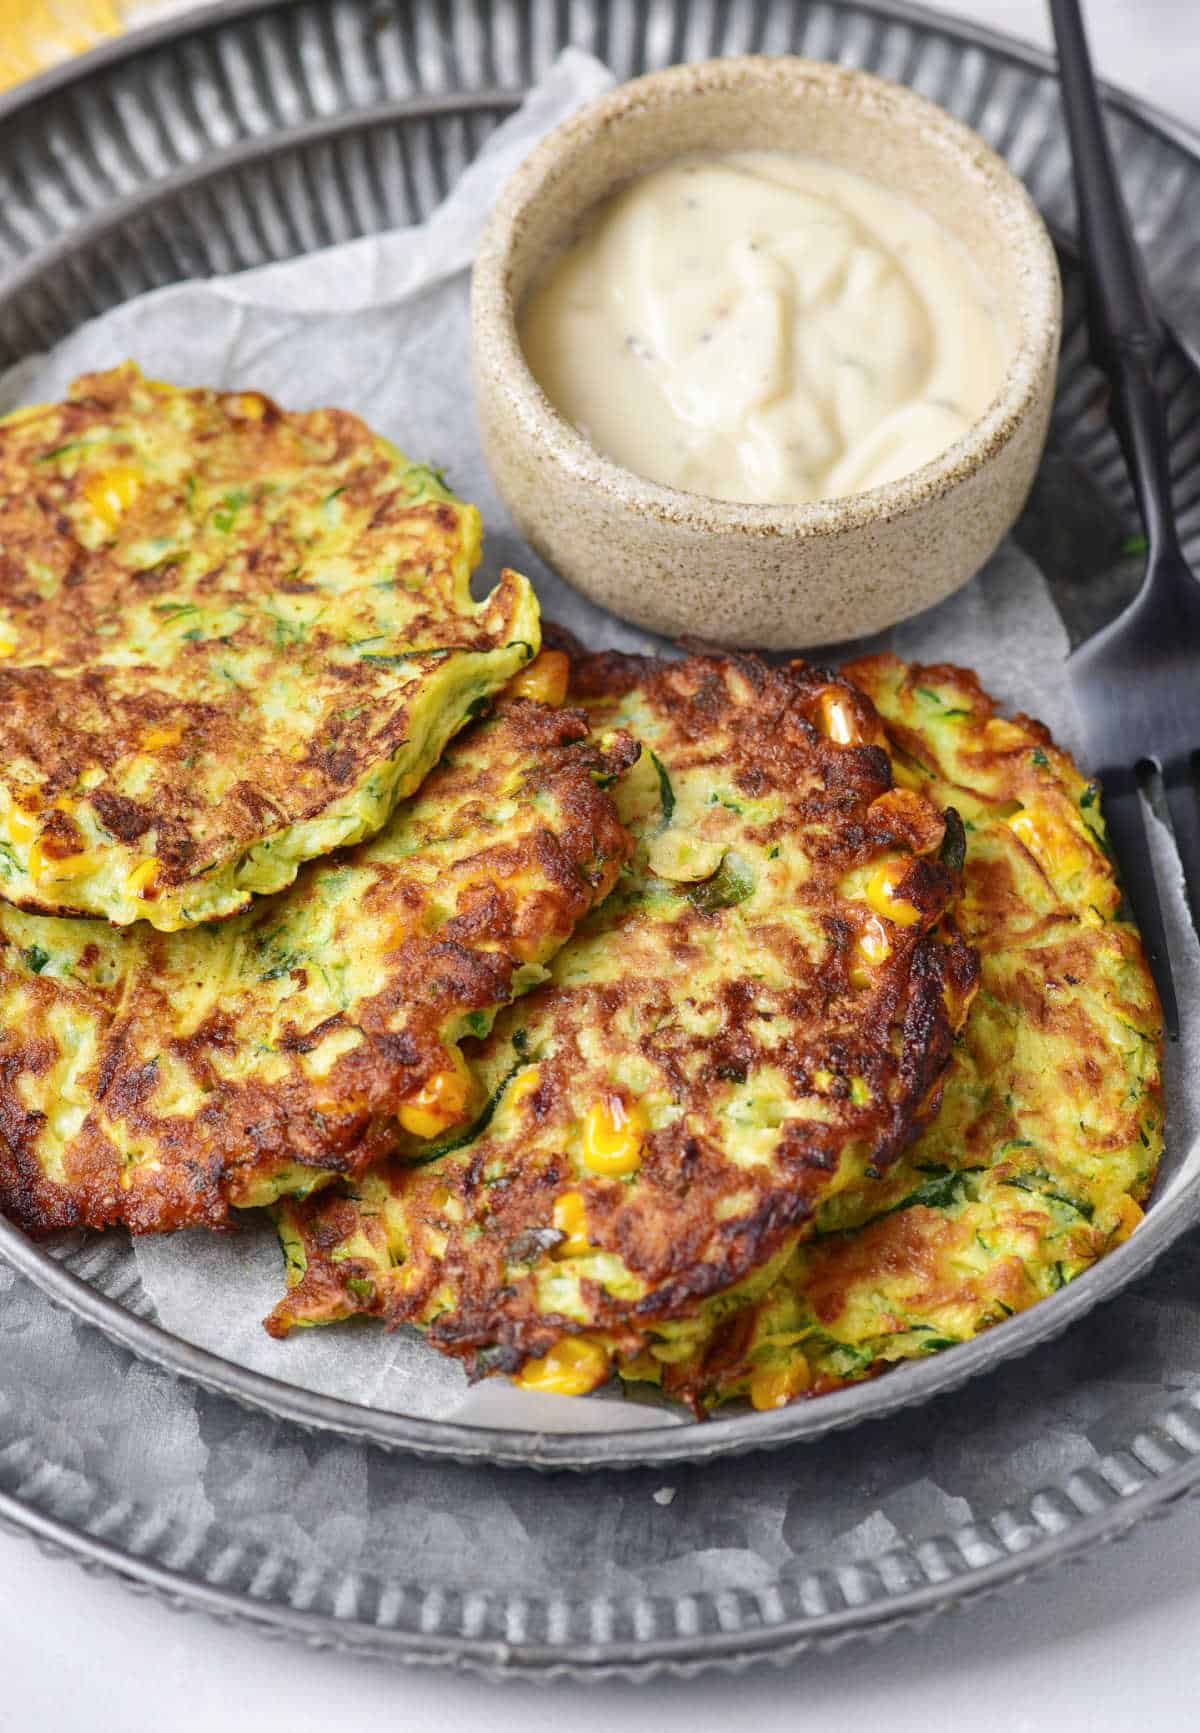 Several zucchini corn fritters overlapping on a dark metal plate. Bowl with mayo.